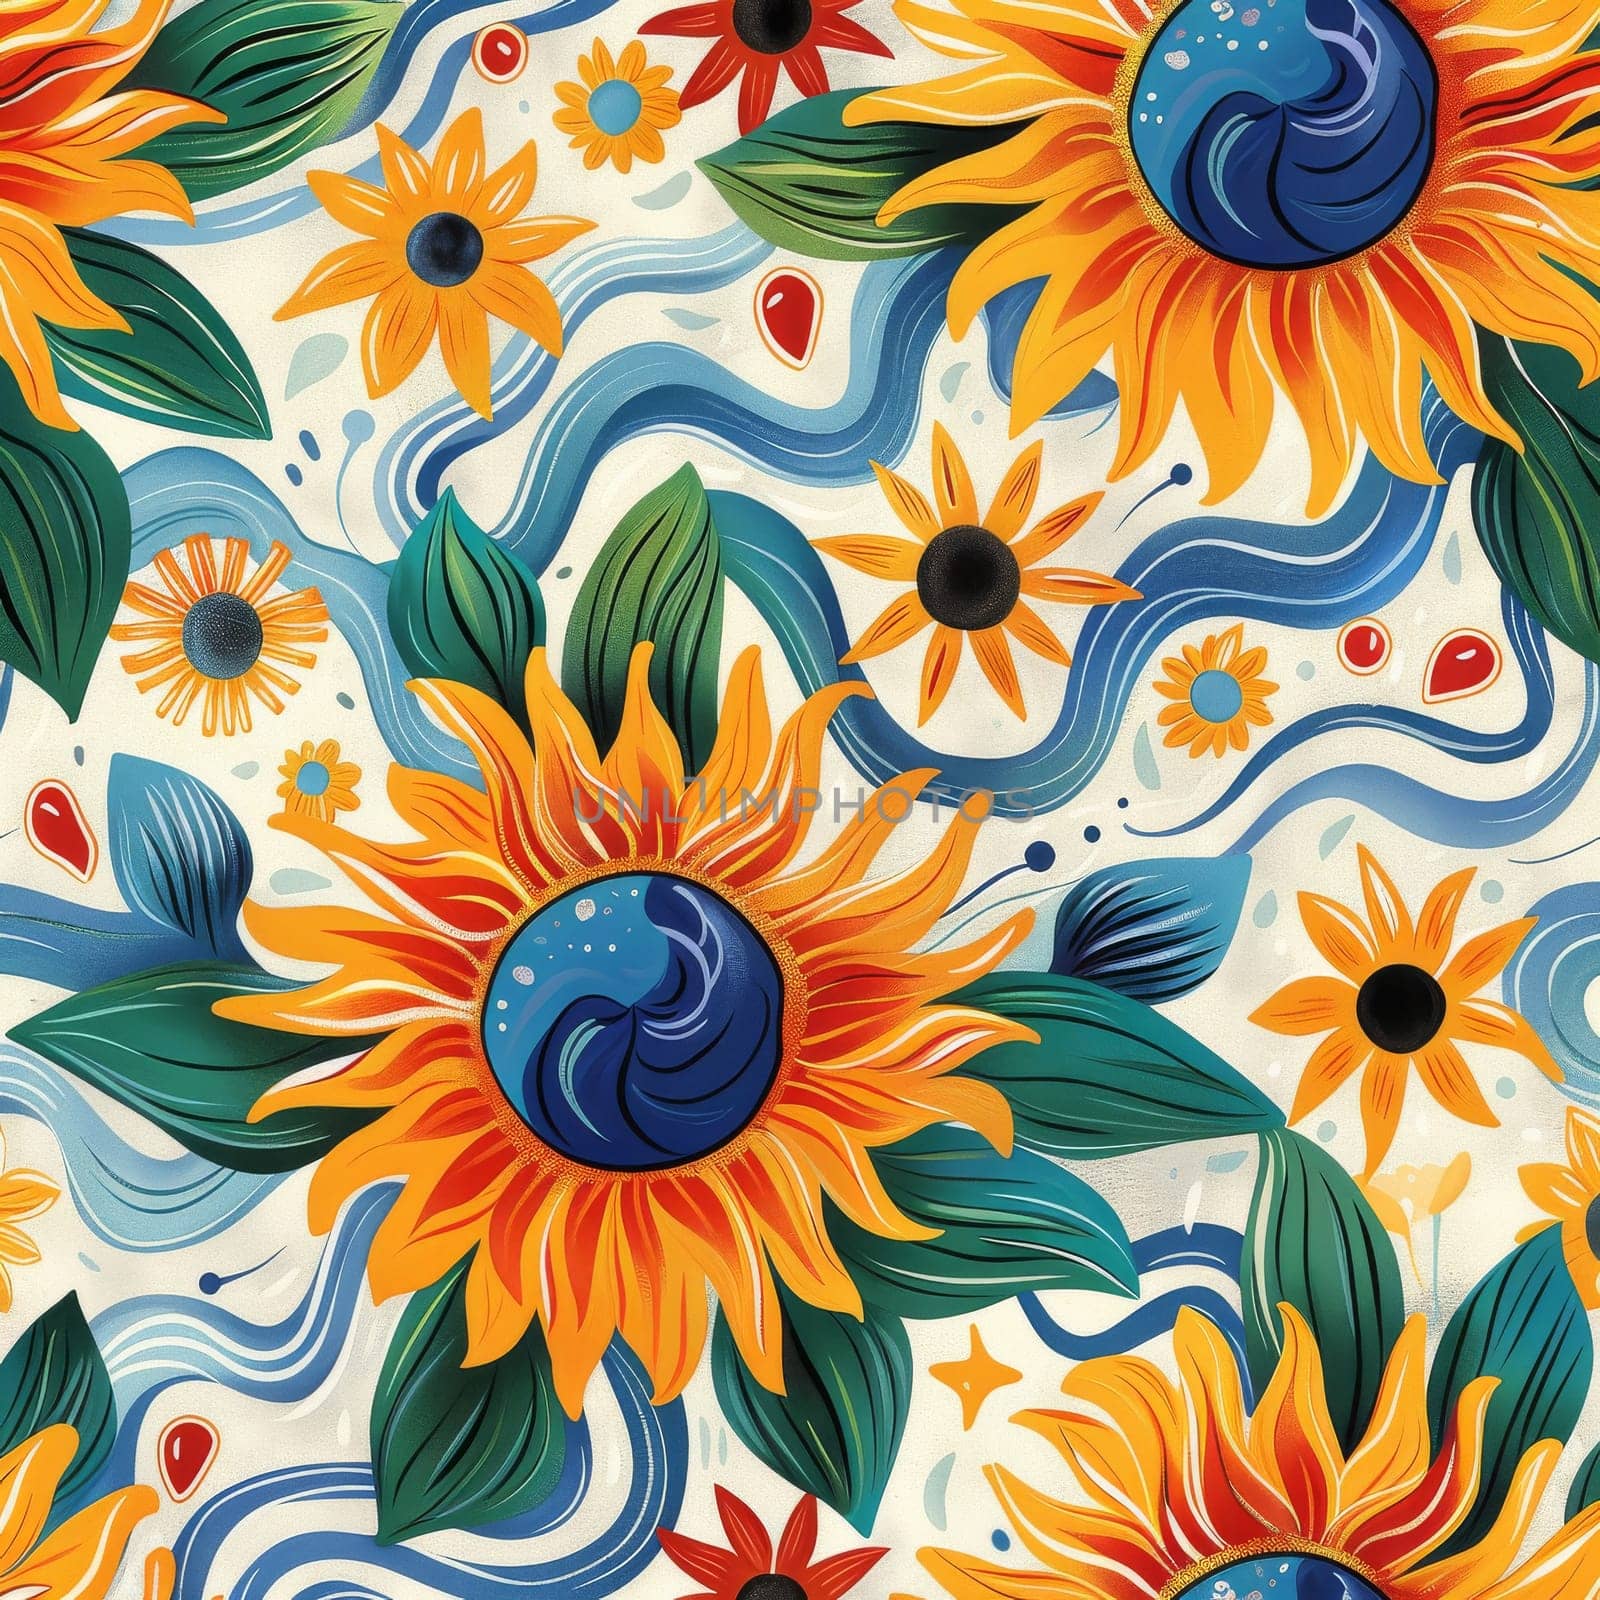 A colorful floral pattern with suns and leaves. The flowers are in various colors and sizes, and the suns are scattered throughout the design. Scene is cheerful and vibrant, with a sense of nature